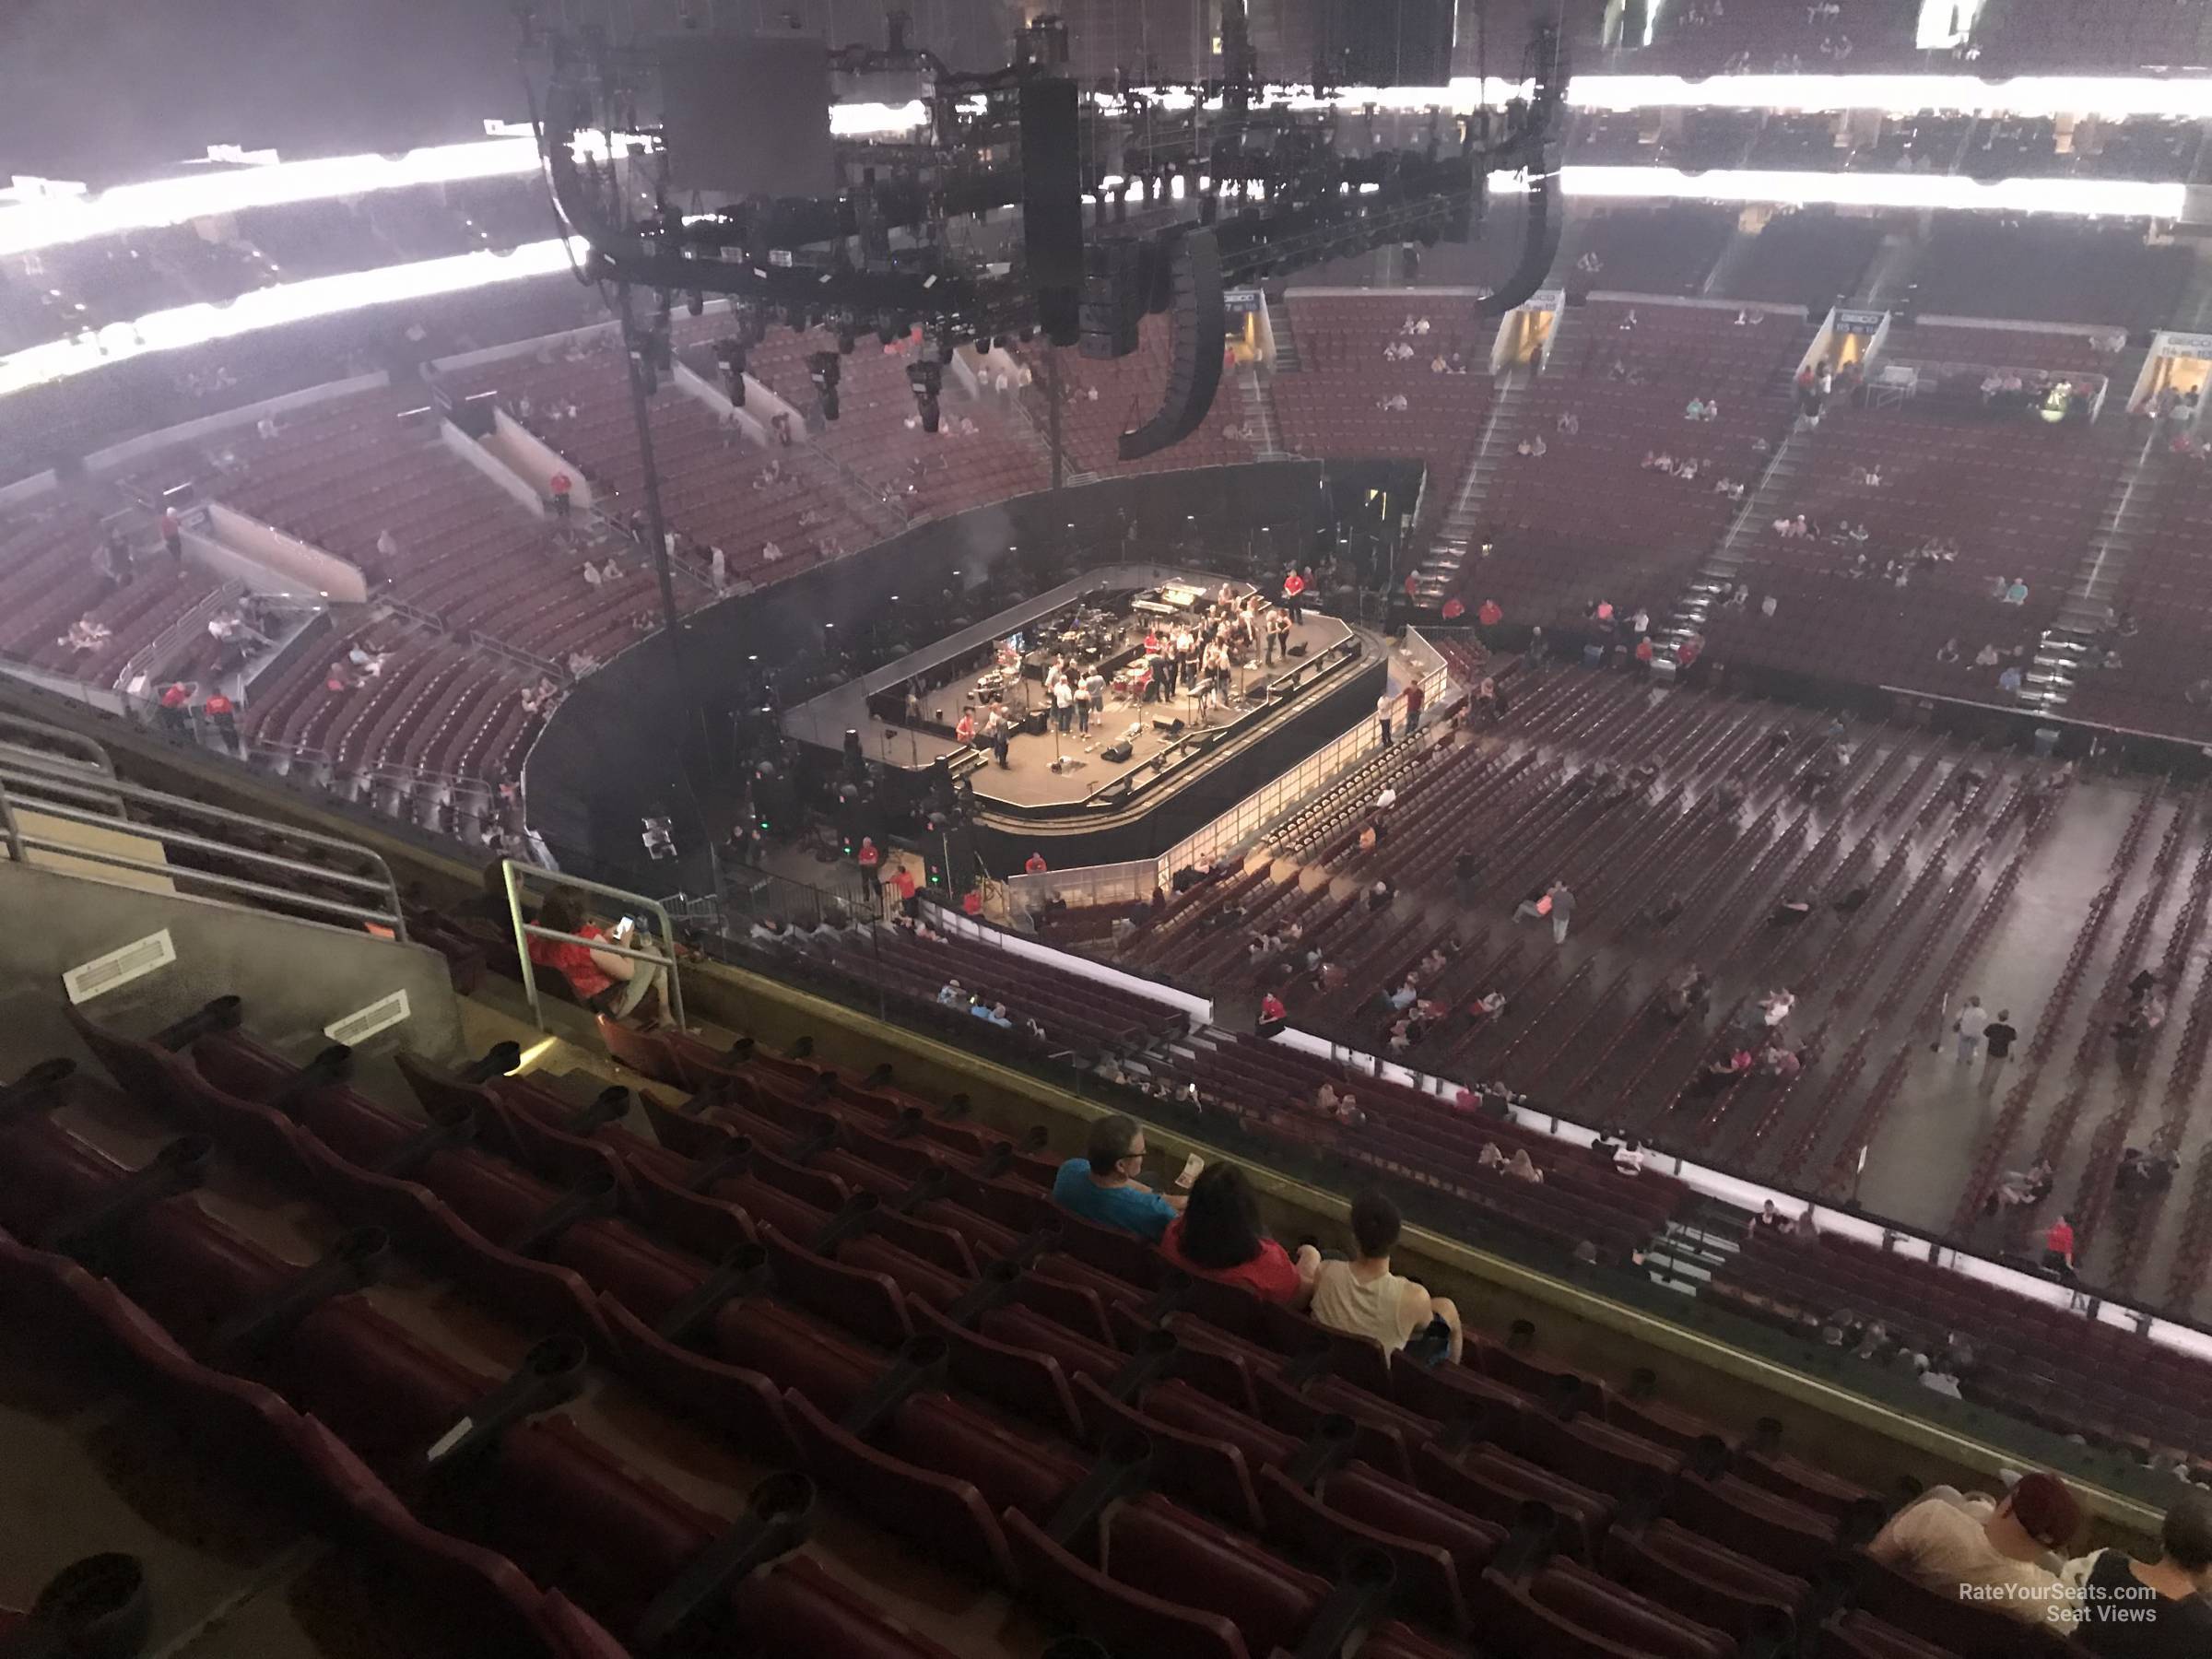 Section 201 at Wells Fargo Center for Concerts